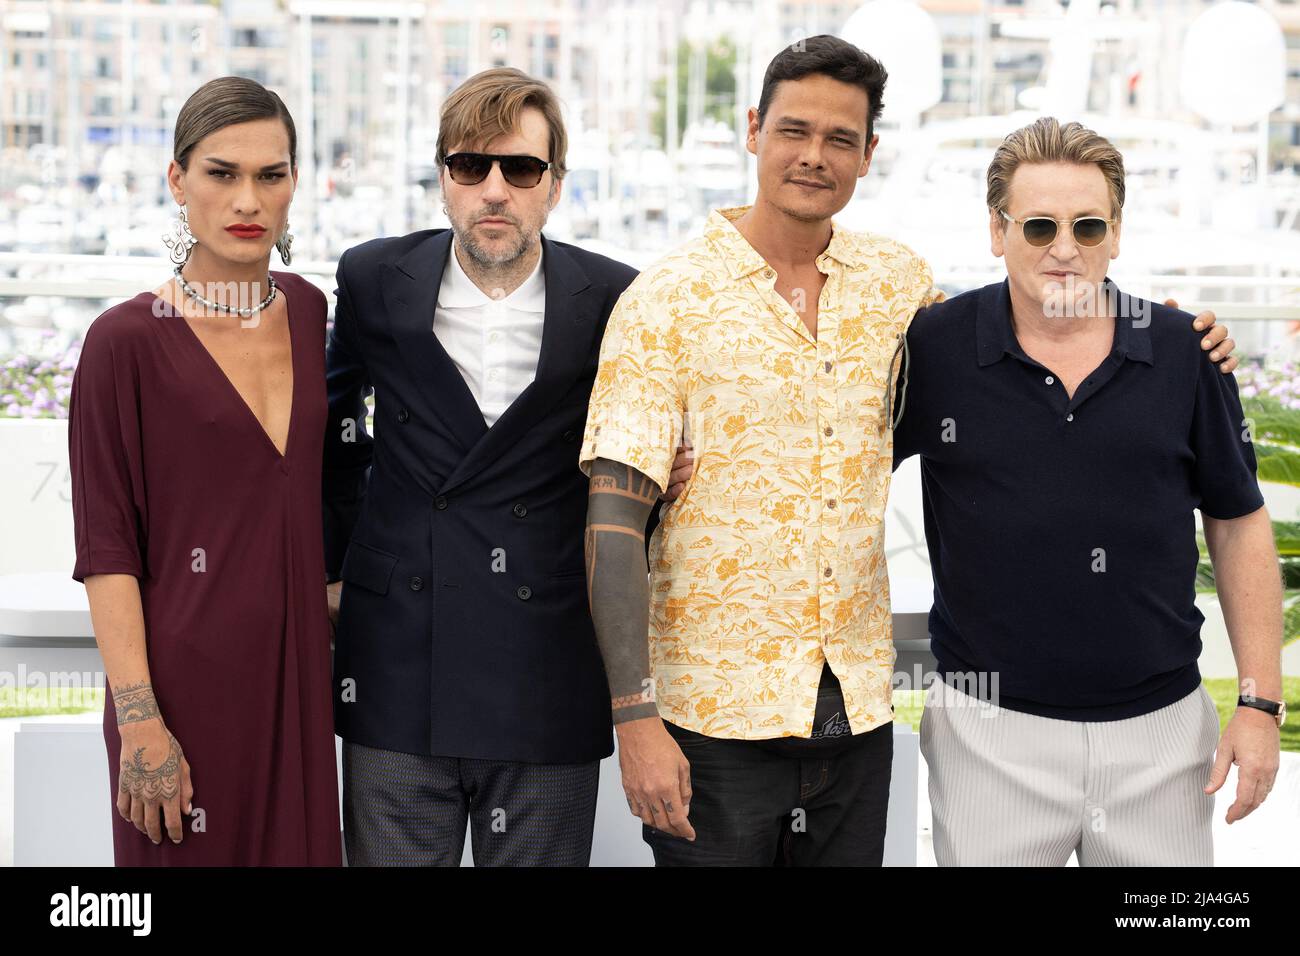 Cannes, France. May 27, 2022, Pahoa Mahagafanau, Albert Serra, Matahi Pambrun and Benoît Magimel attend the photocall for Pacification during the 75th annual Cannes film festival at Palais des Festivals on May 27, 2022 in Cannes, France. Photo by David Niviere/ABACAPRESS.COM Stock Photo